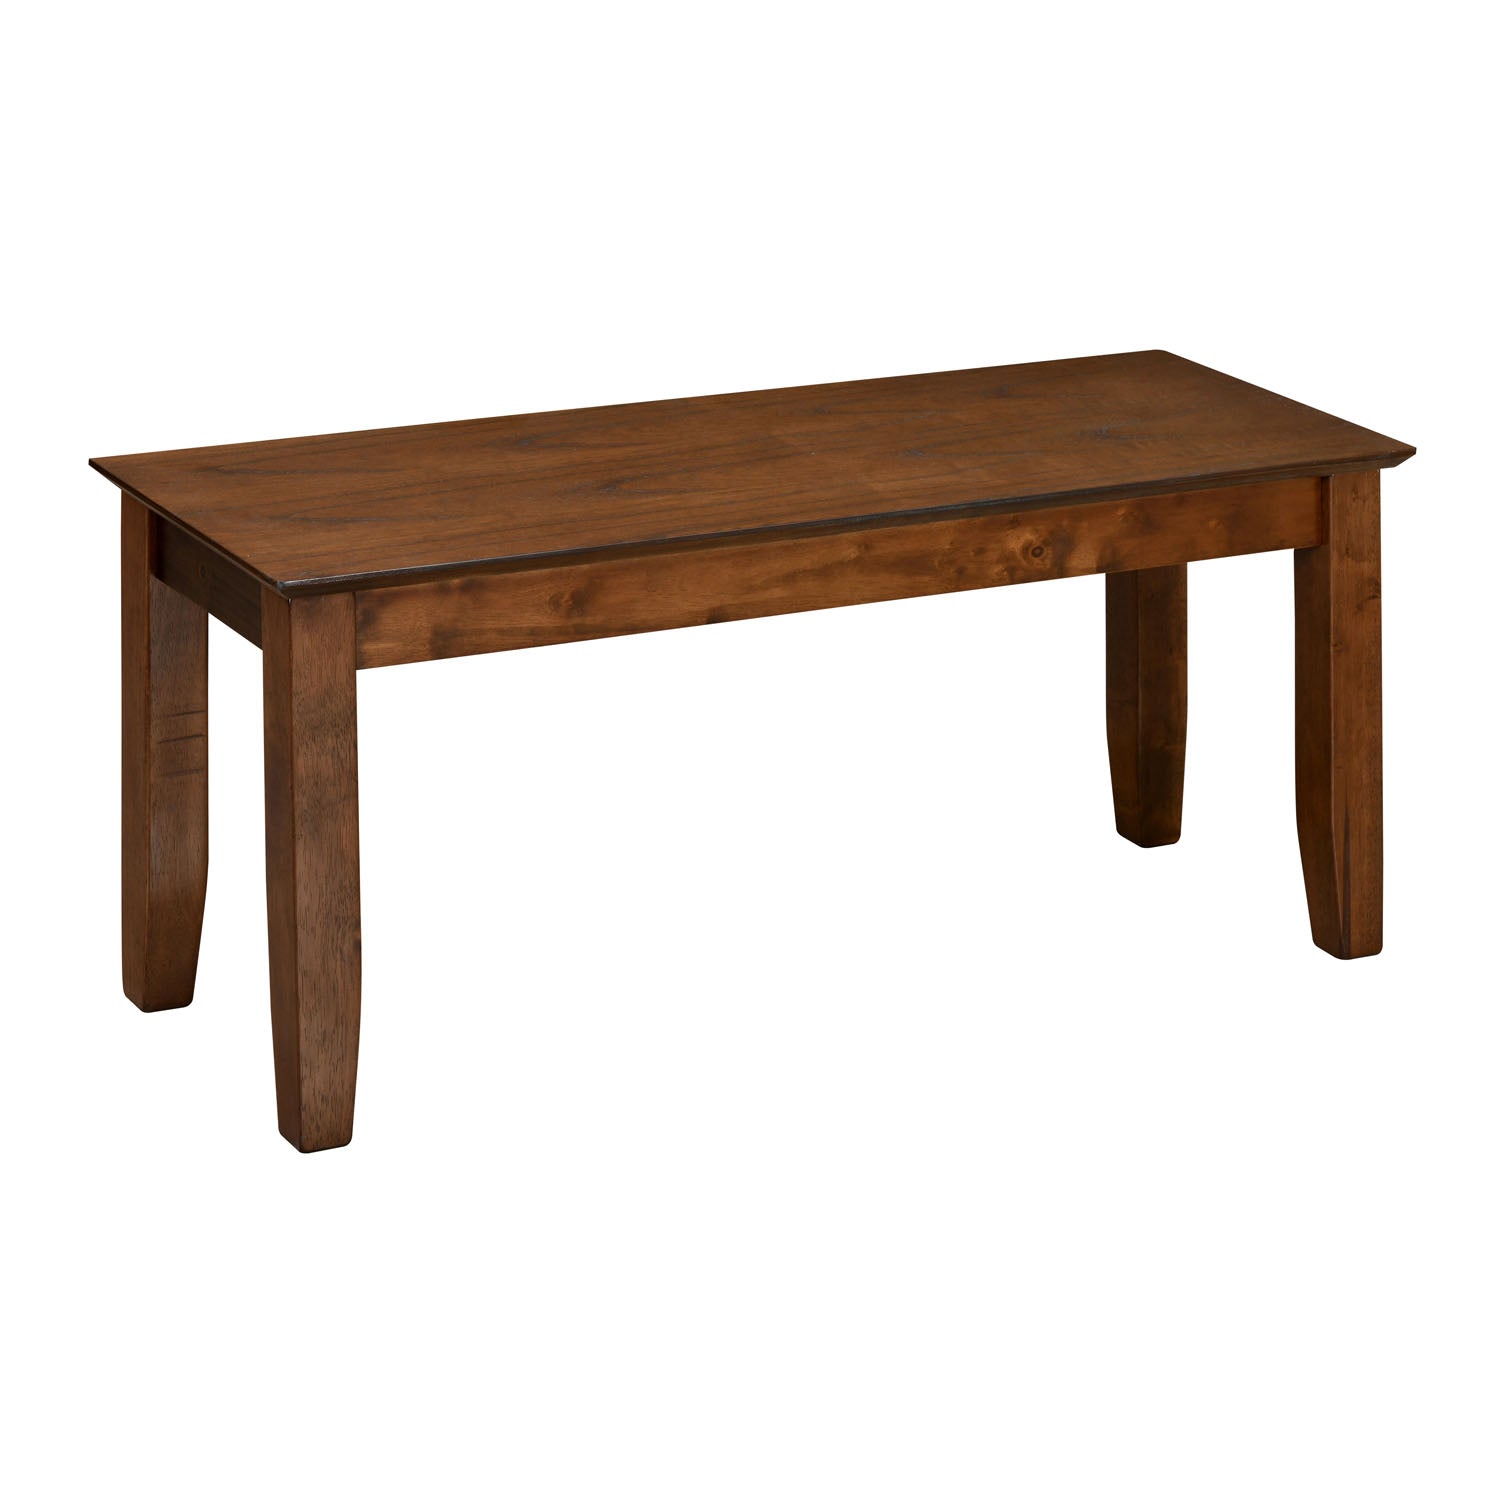 Carter Solid Wood 4 seater Dining Bench (Antique Oak)